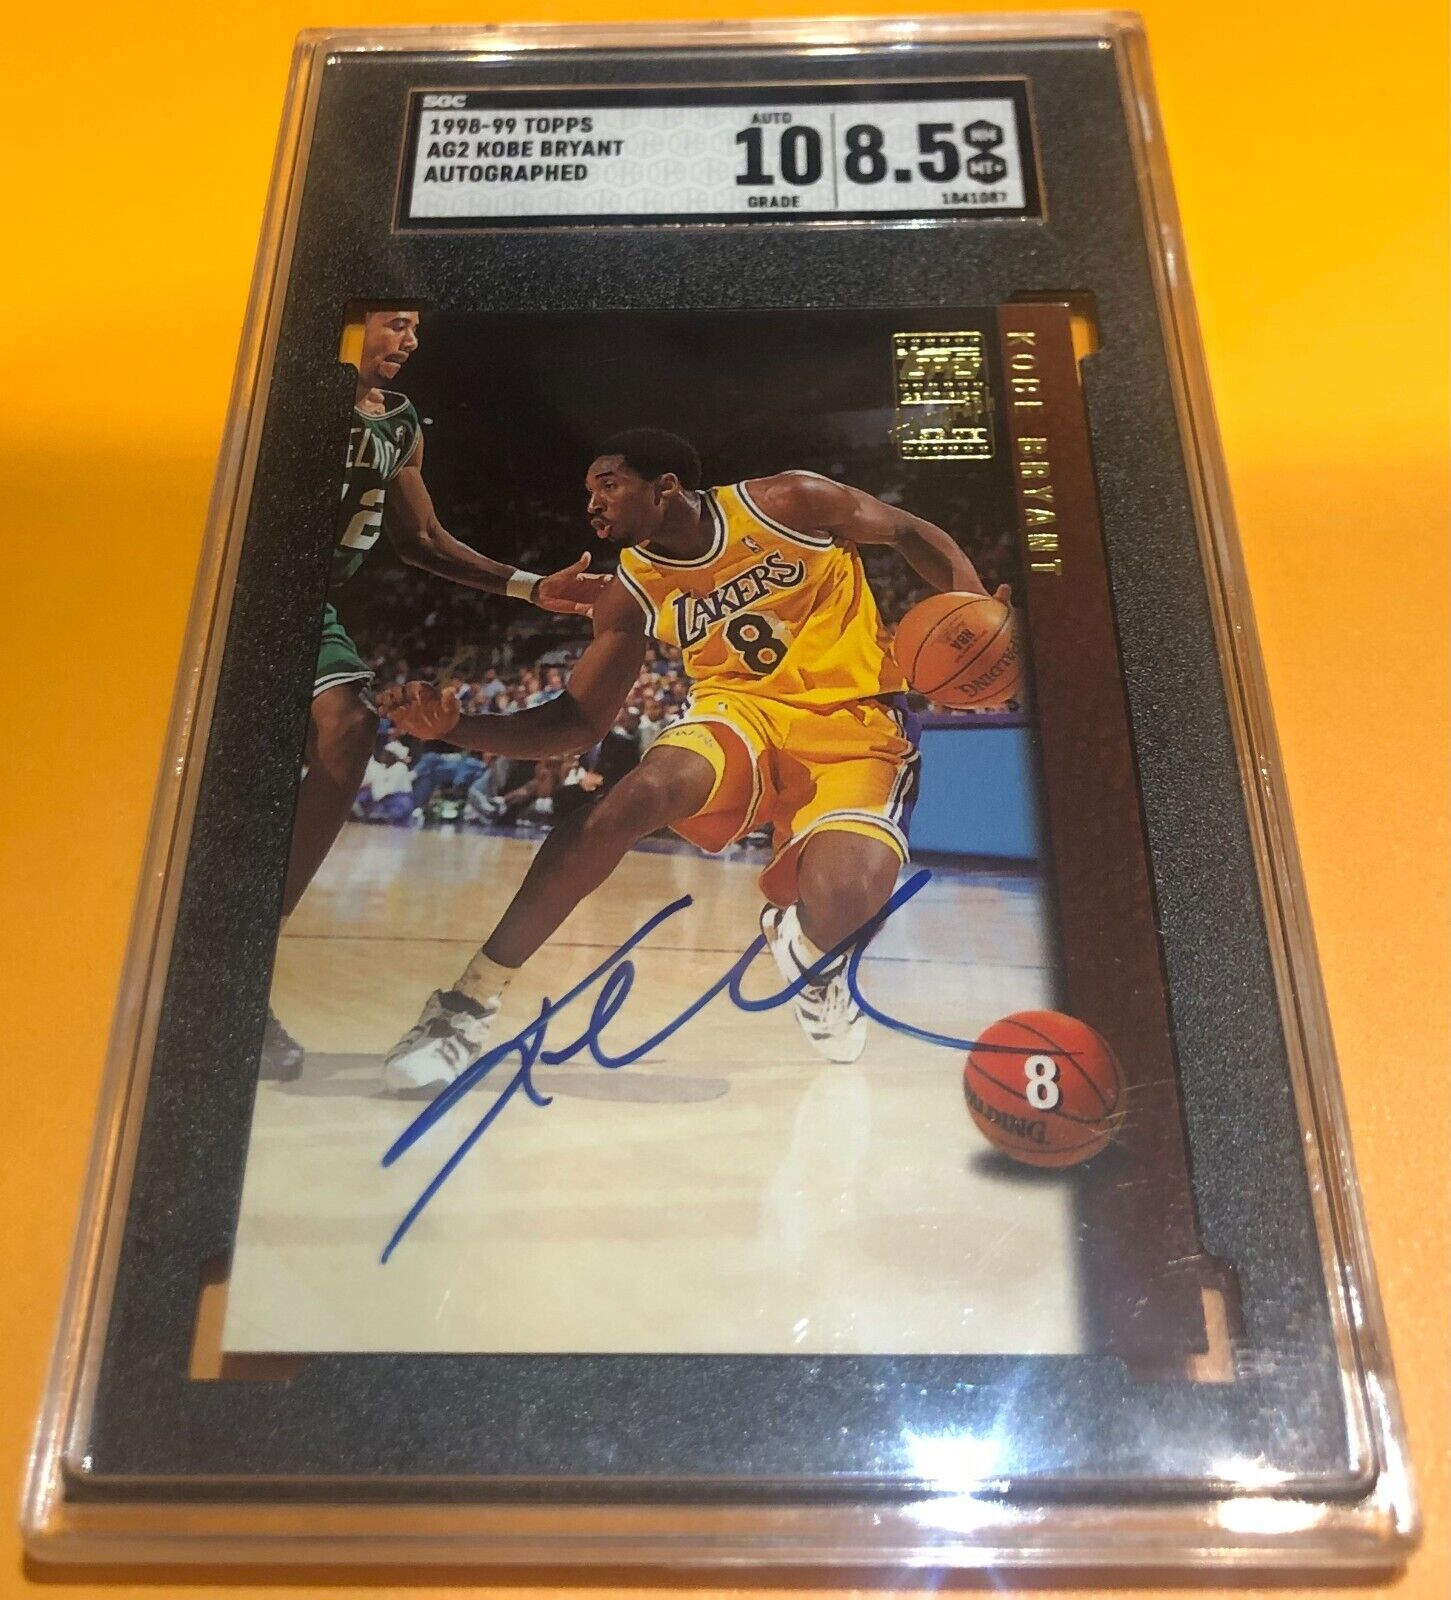 Kobe BRYANT 1998-99 Topps - Certified Autograph Issue #AG2 SGC 8.5 and AUTO 1 0